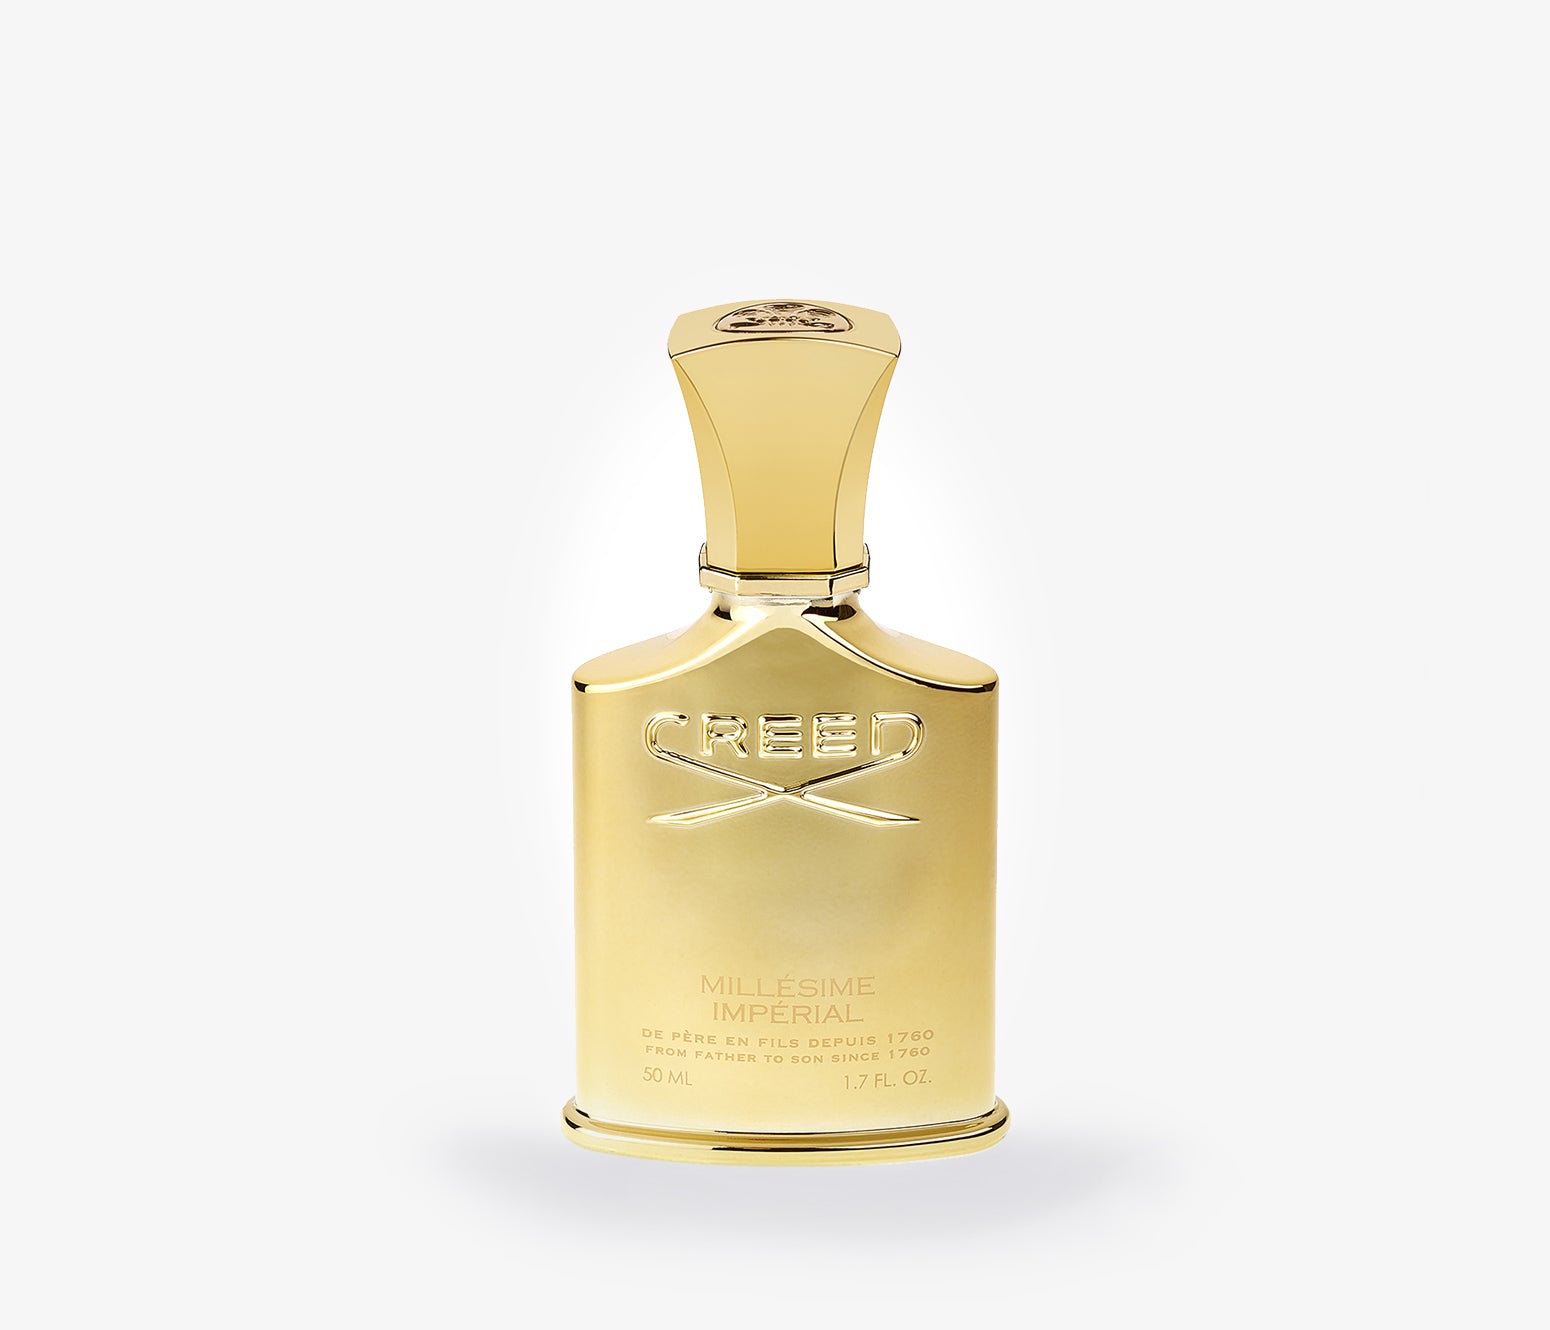 Creed - Millesime Imperial - 100ml - '10000534 - Product Image - Fragrance - Les Senteurs